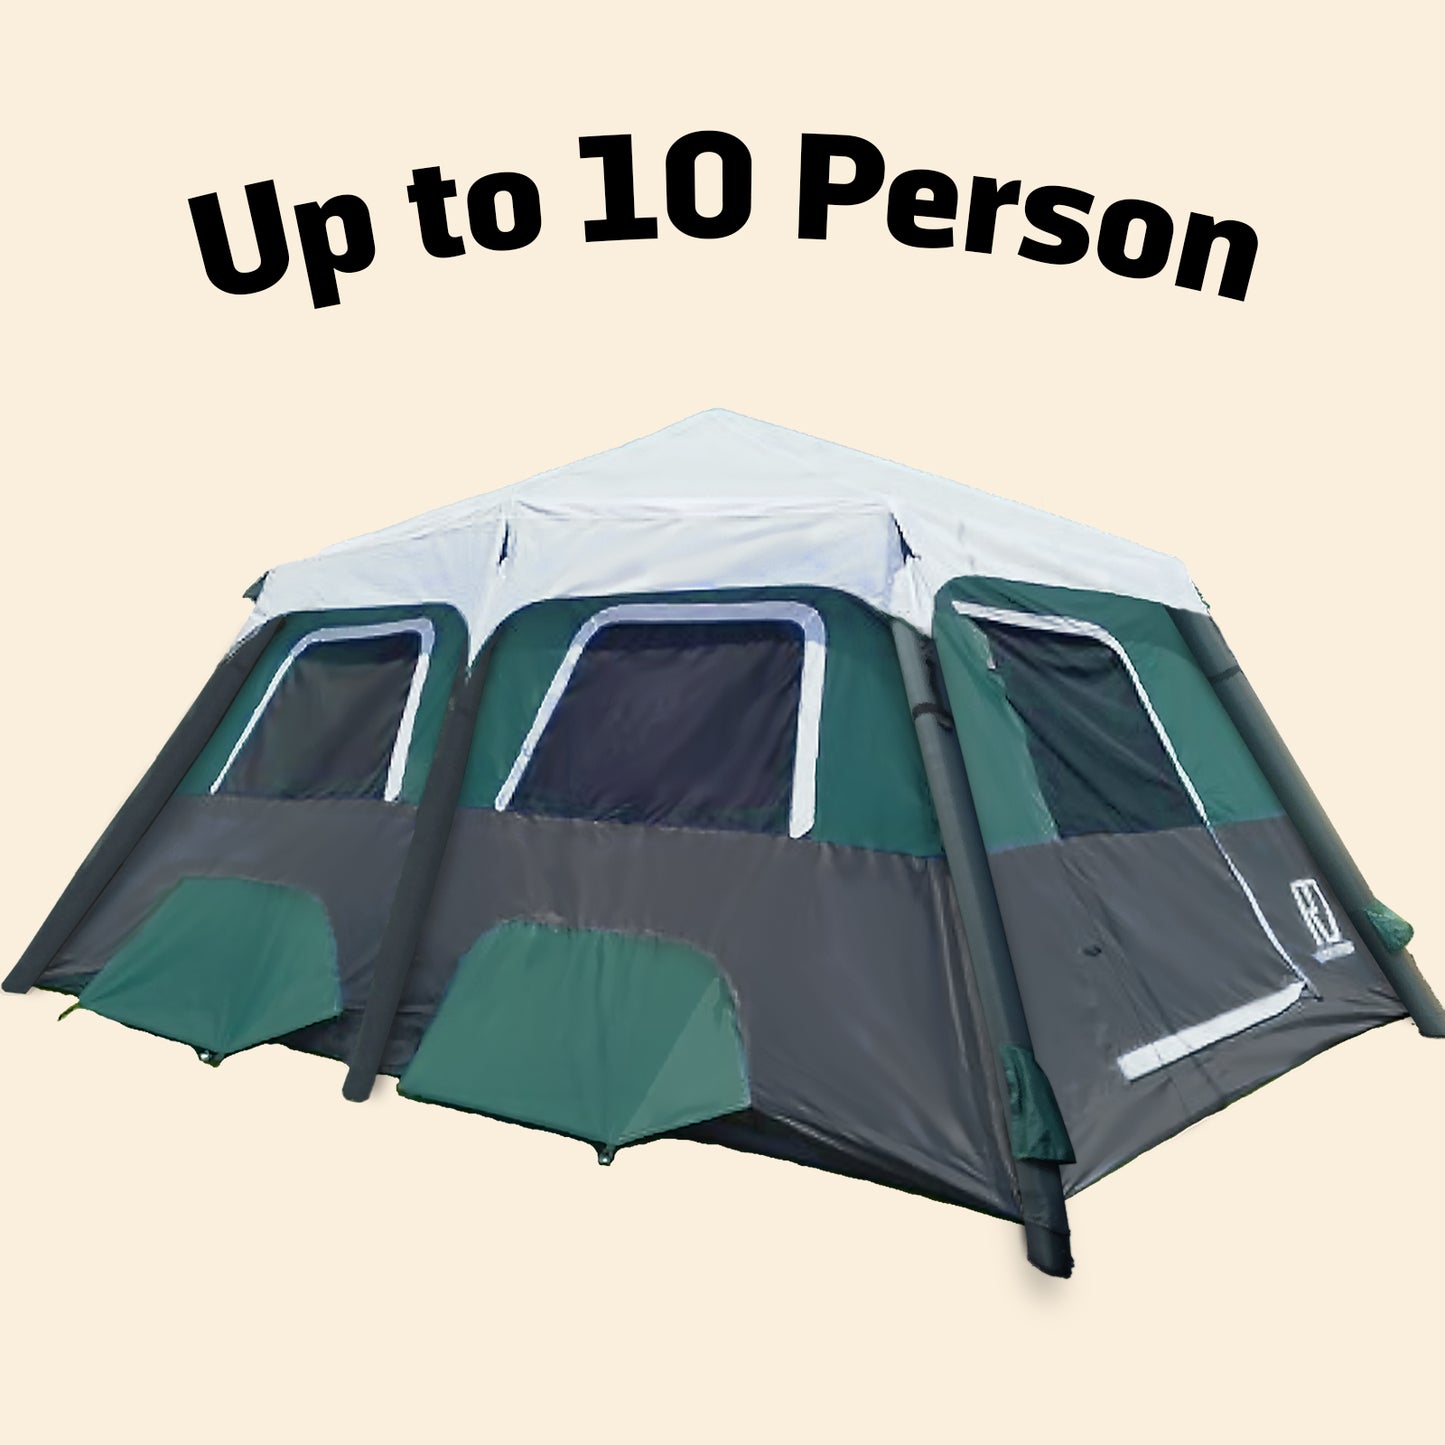 Extra Large-Sized 2 Step Cabin Tent (Up To 10 Person)